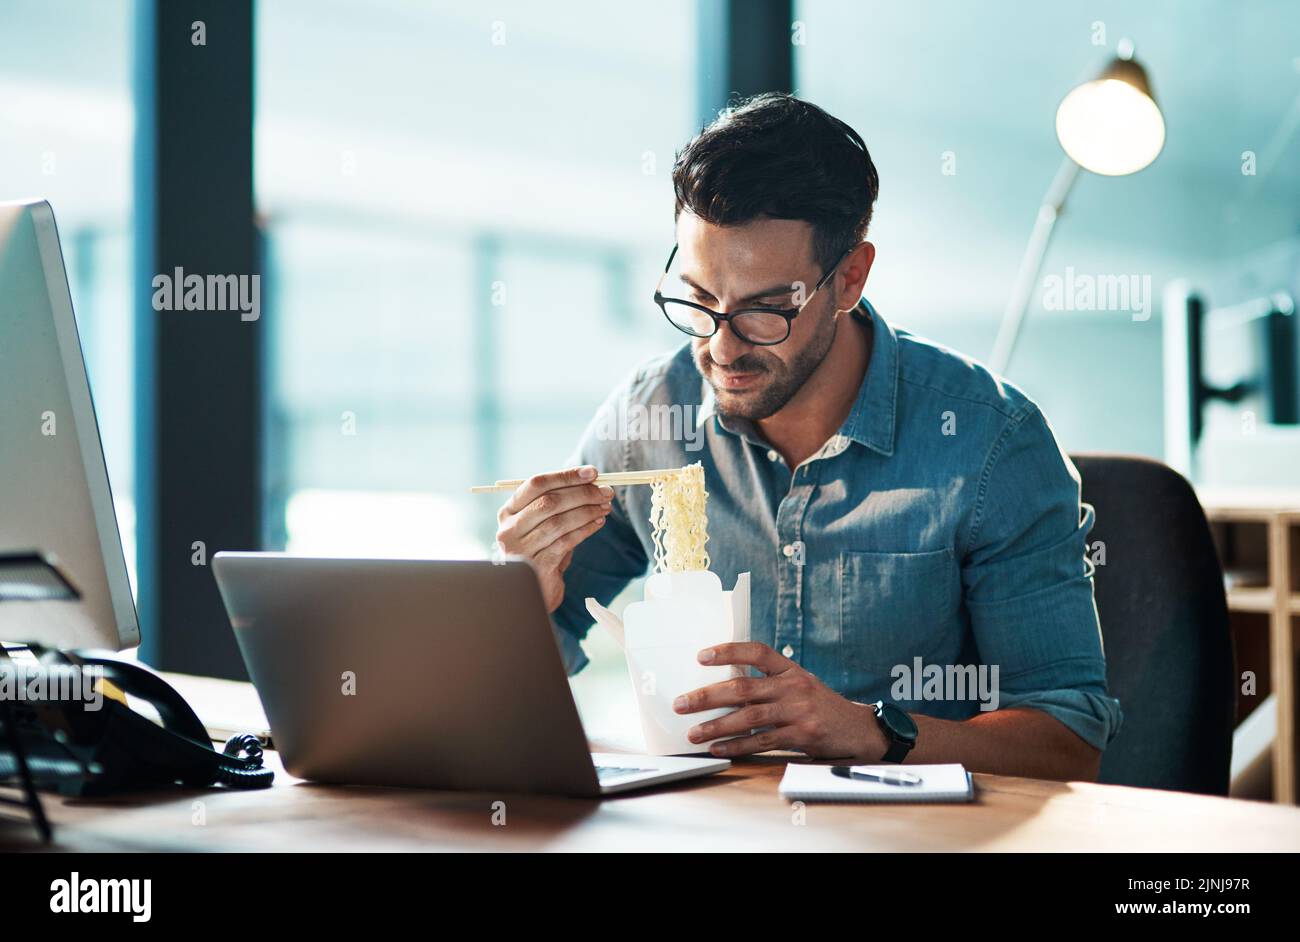 Business man eating lunch at his desk, reading an email on a laptop and working overtime in office. Corporate professional, manager or employee Stock Photo